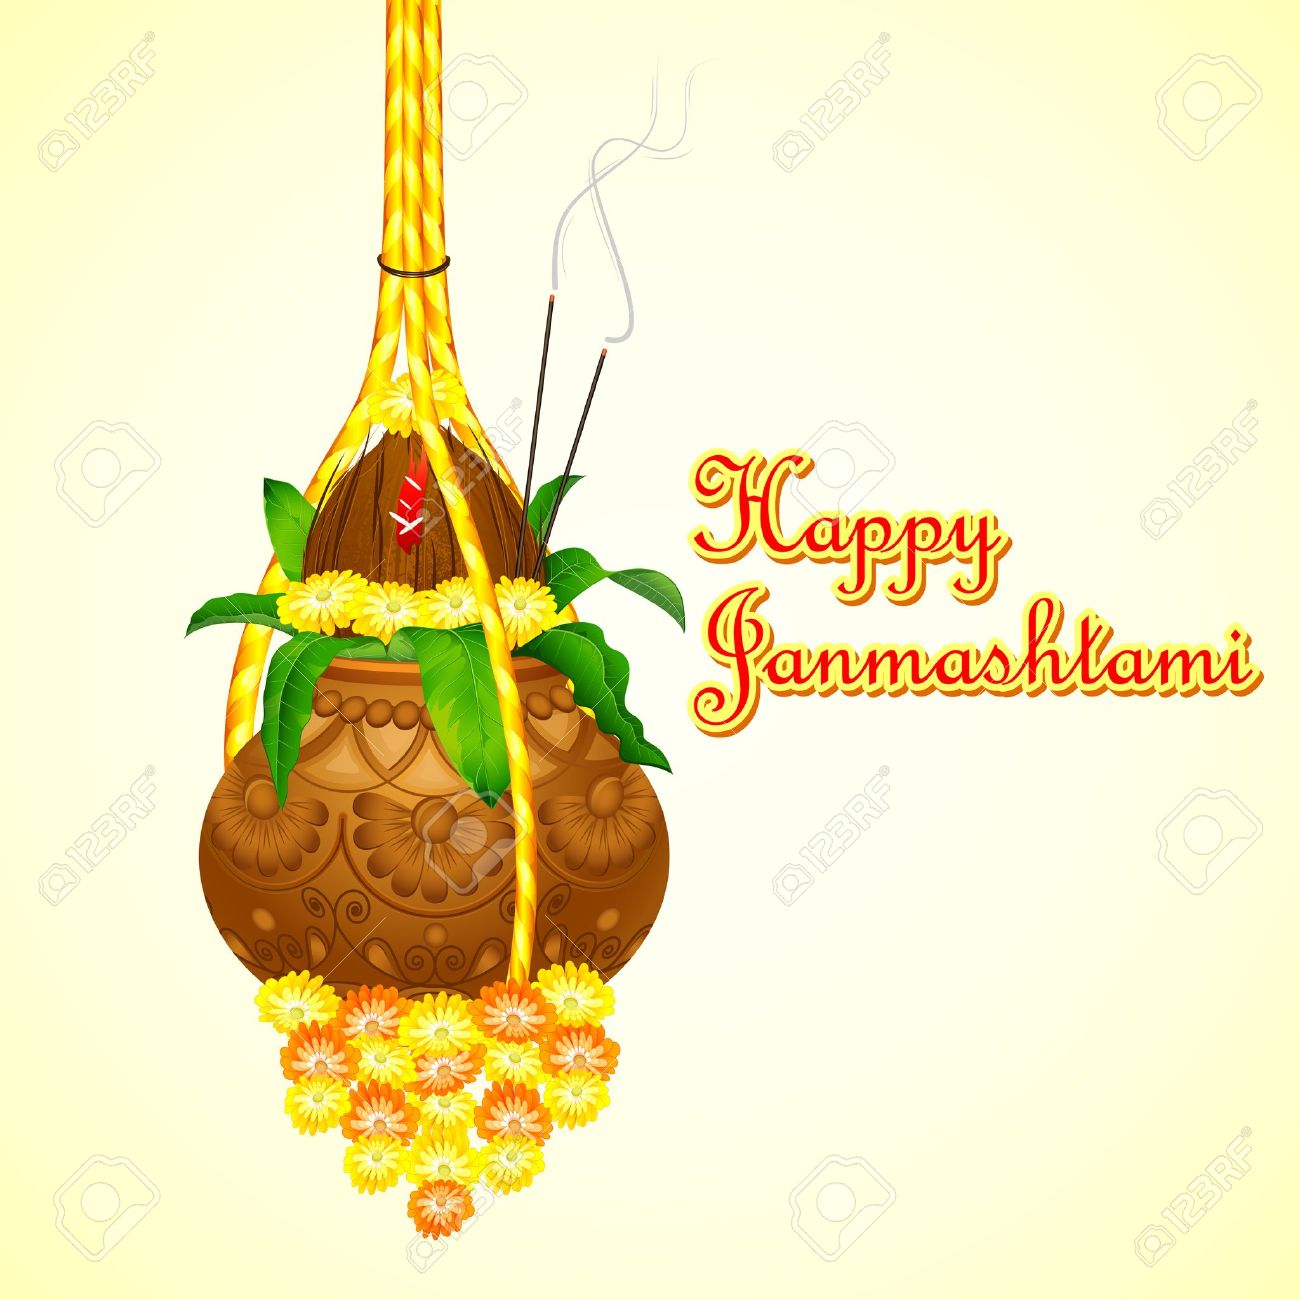 Sri Krishna Janmashtami: Images, HD Wallpapers, Messages, Wishes, Pictures,  Greetings